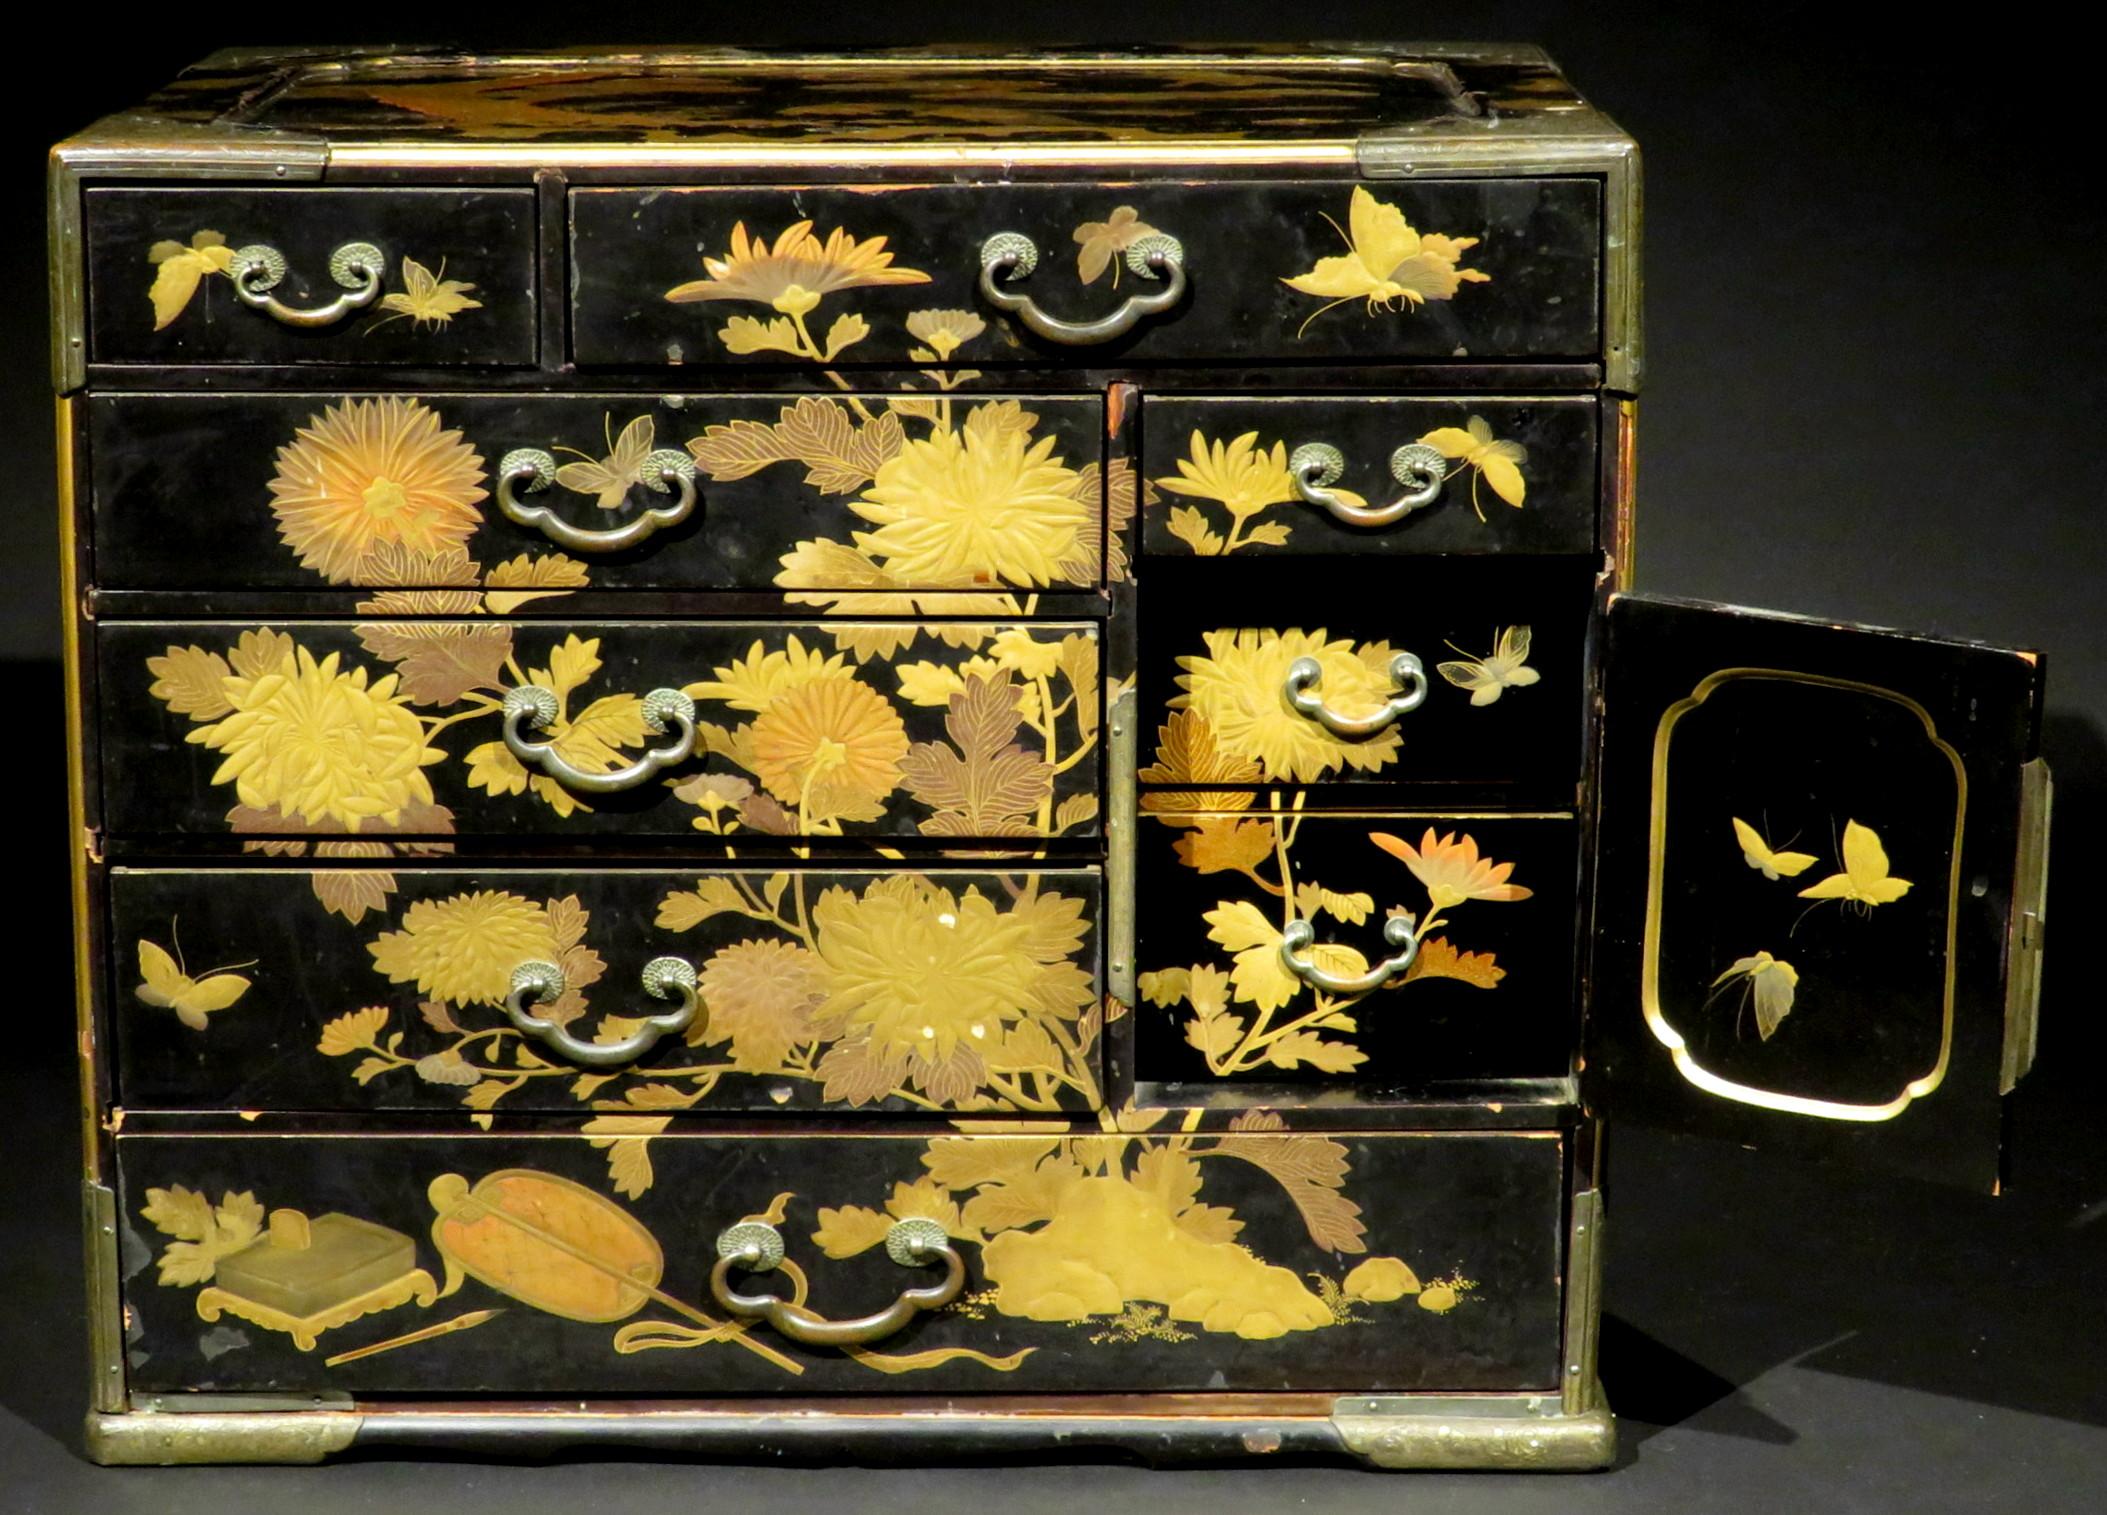 An outstanding 19th century black lacquer tansu decorated overall in hand applied gilt lacquer (maki-e) motifs depicting flower-heads, prunus, scholarly objects and assorted good luck symbols i.e. Rat (prosperity), Turtle (wisdom), Crane (longevity)